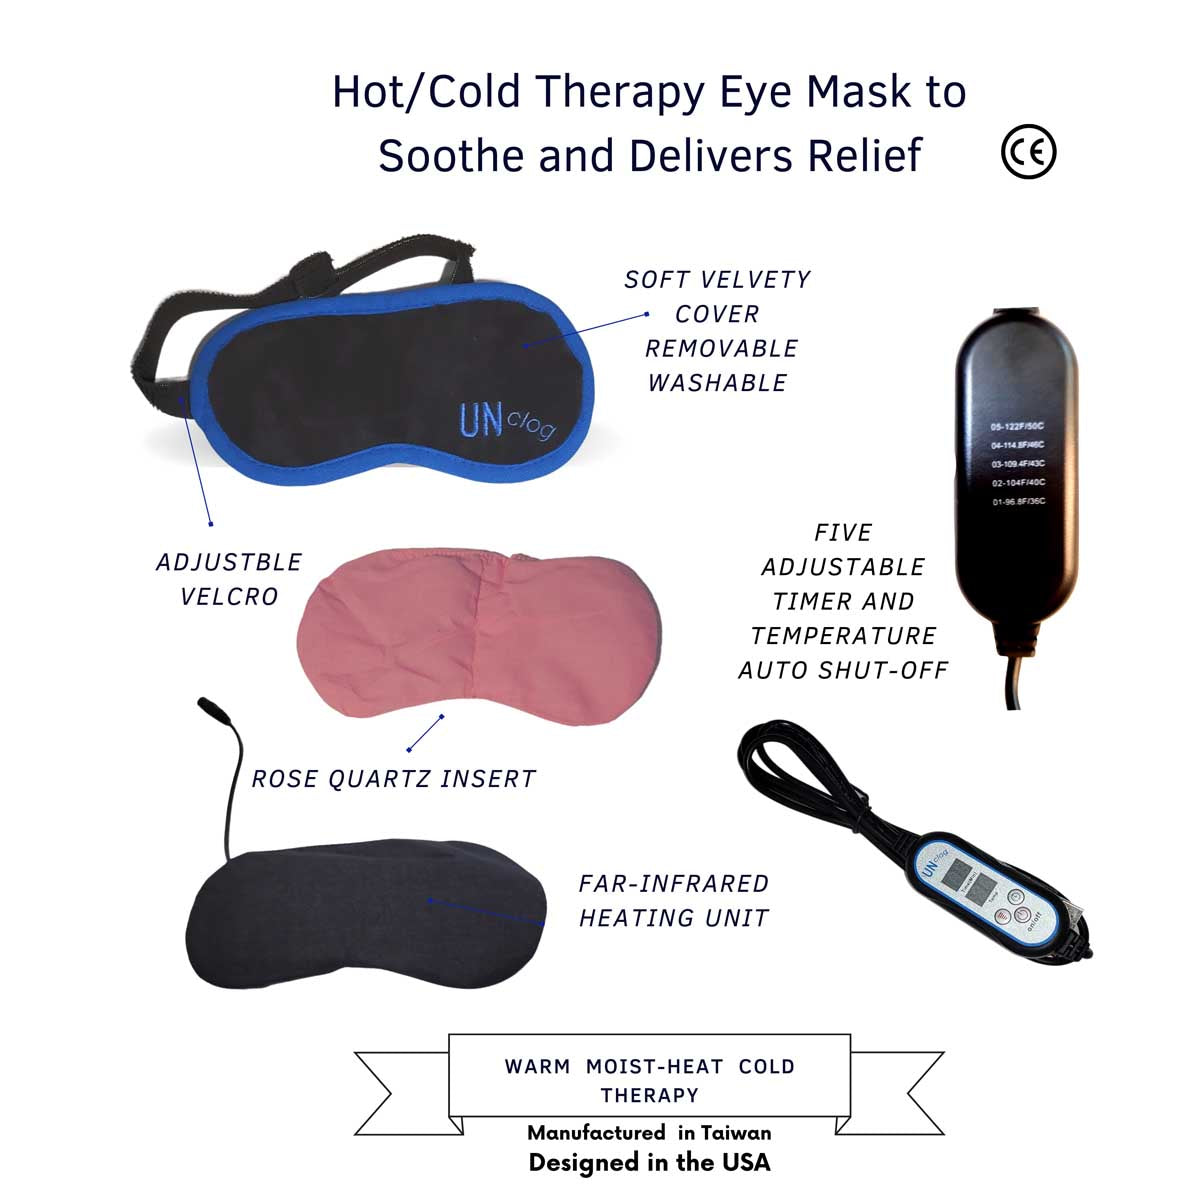 Check out the major elements of the best heated eye mask for dry eyes.